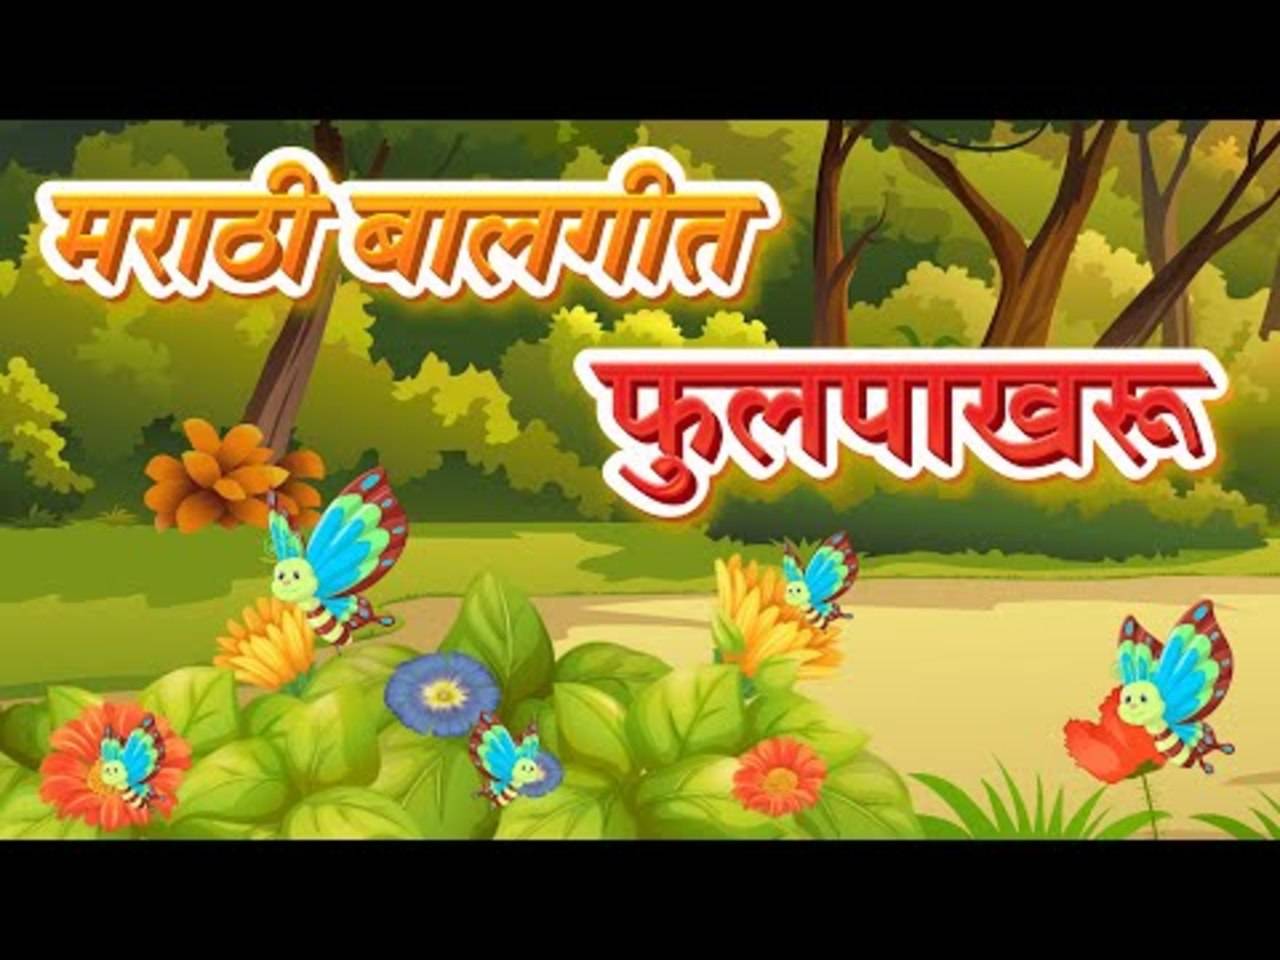 Listen To Children Marathi Nursery Rhyme 'Butterfly Song' for Kids - Check  out Fun Kids Nursery Rhymes And Baby Songs In Marathi | Entertainment -  Times of India Videos